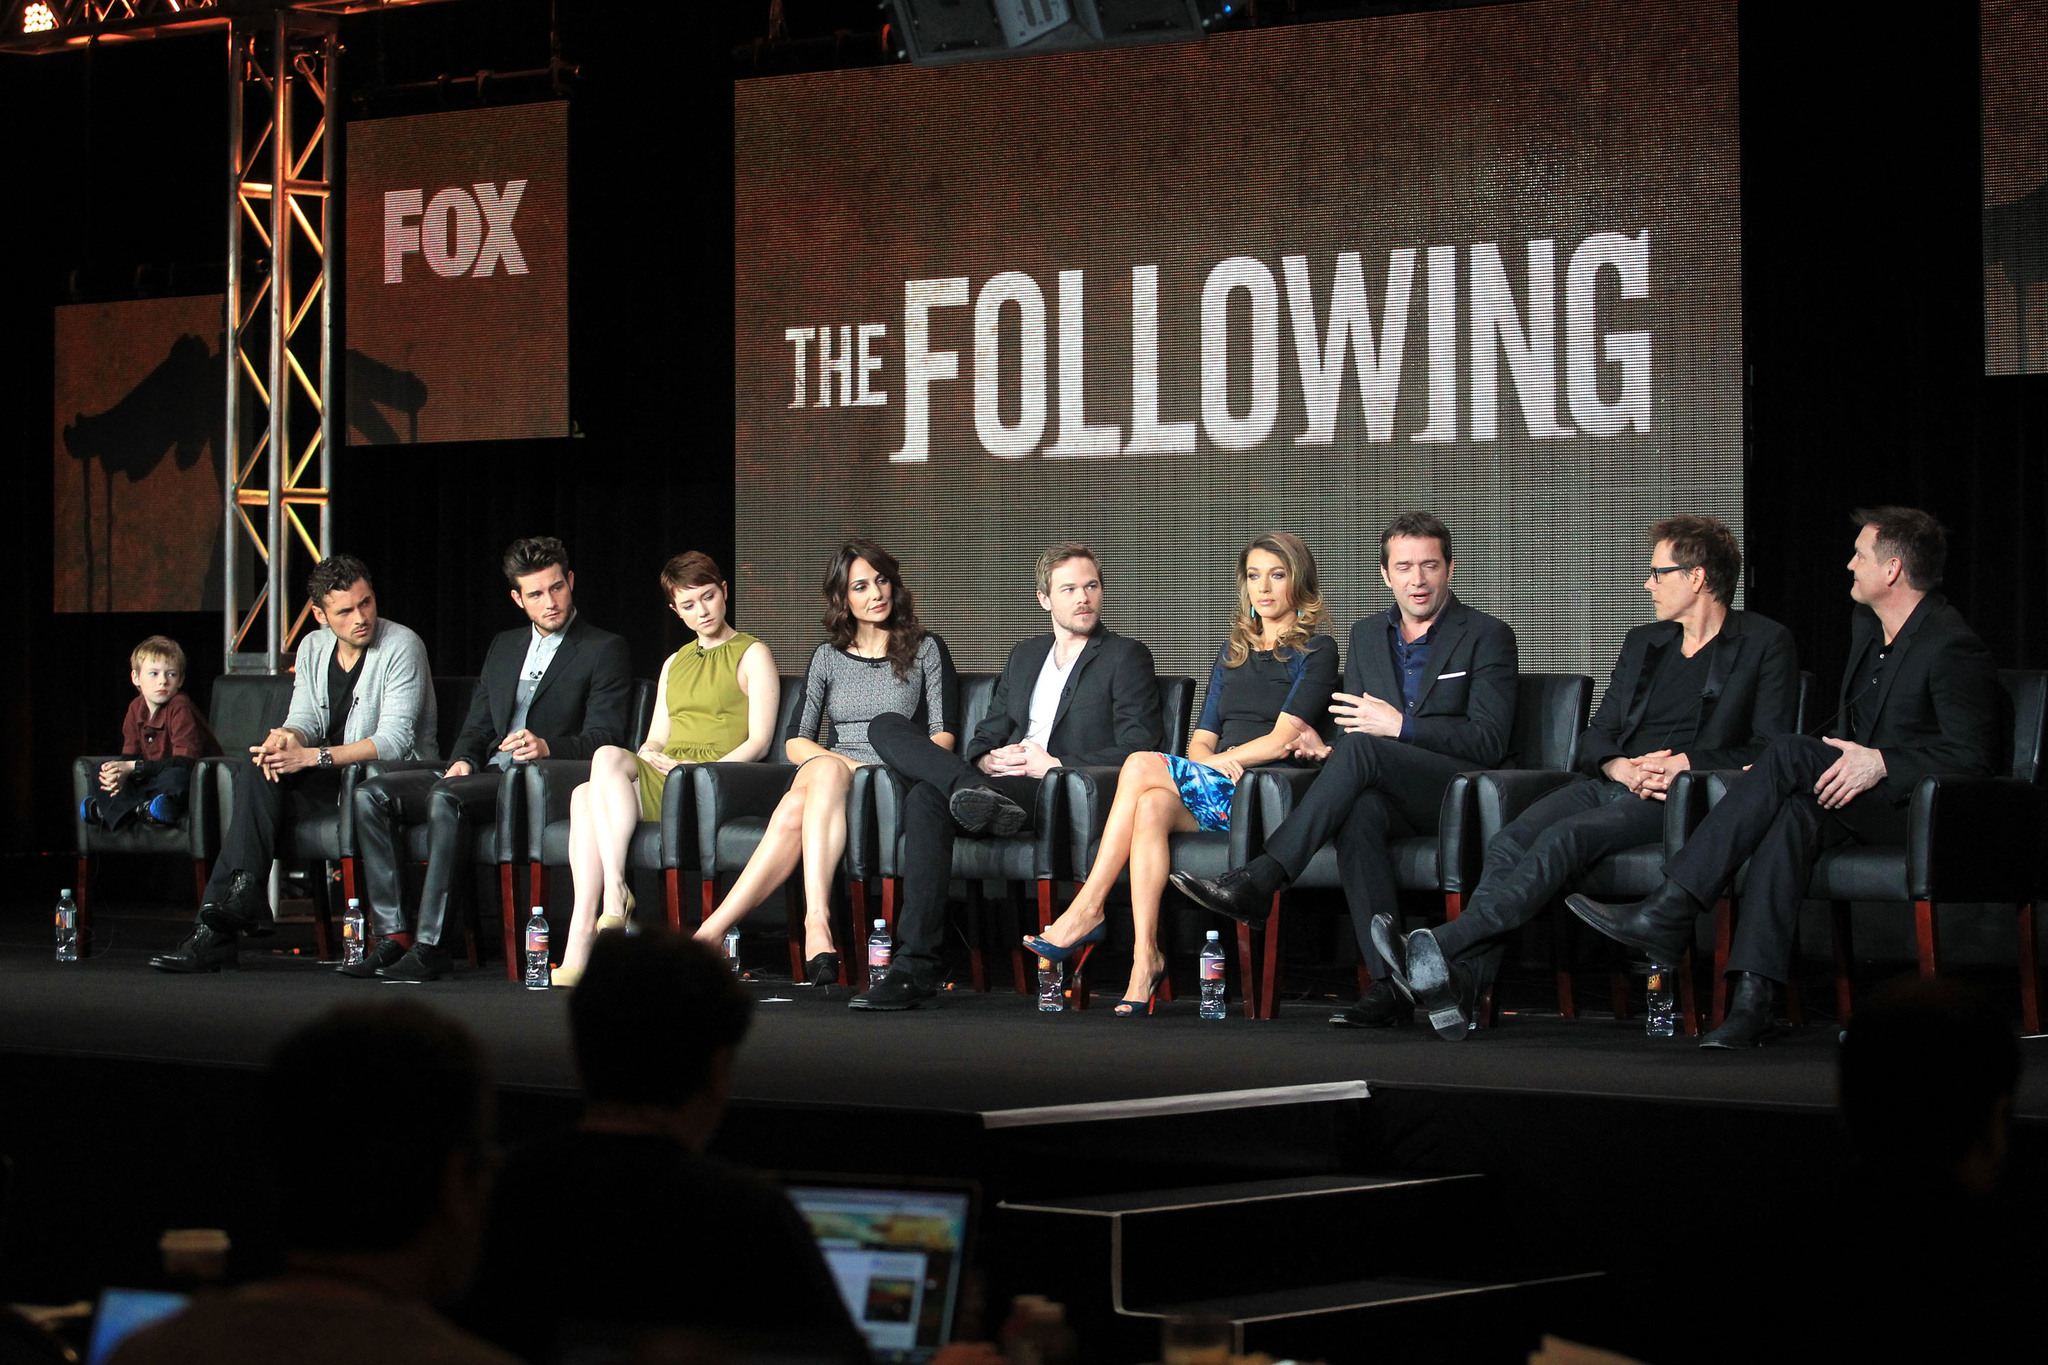 Kevin Bacon, Shawn Ashmore, Annie Parisse, James Purefoy, Natalie Zea, Valorie Curry, Nico Tortorella, Kyle Catlett and Adan Canto at event of The Following (2013)